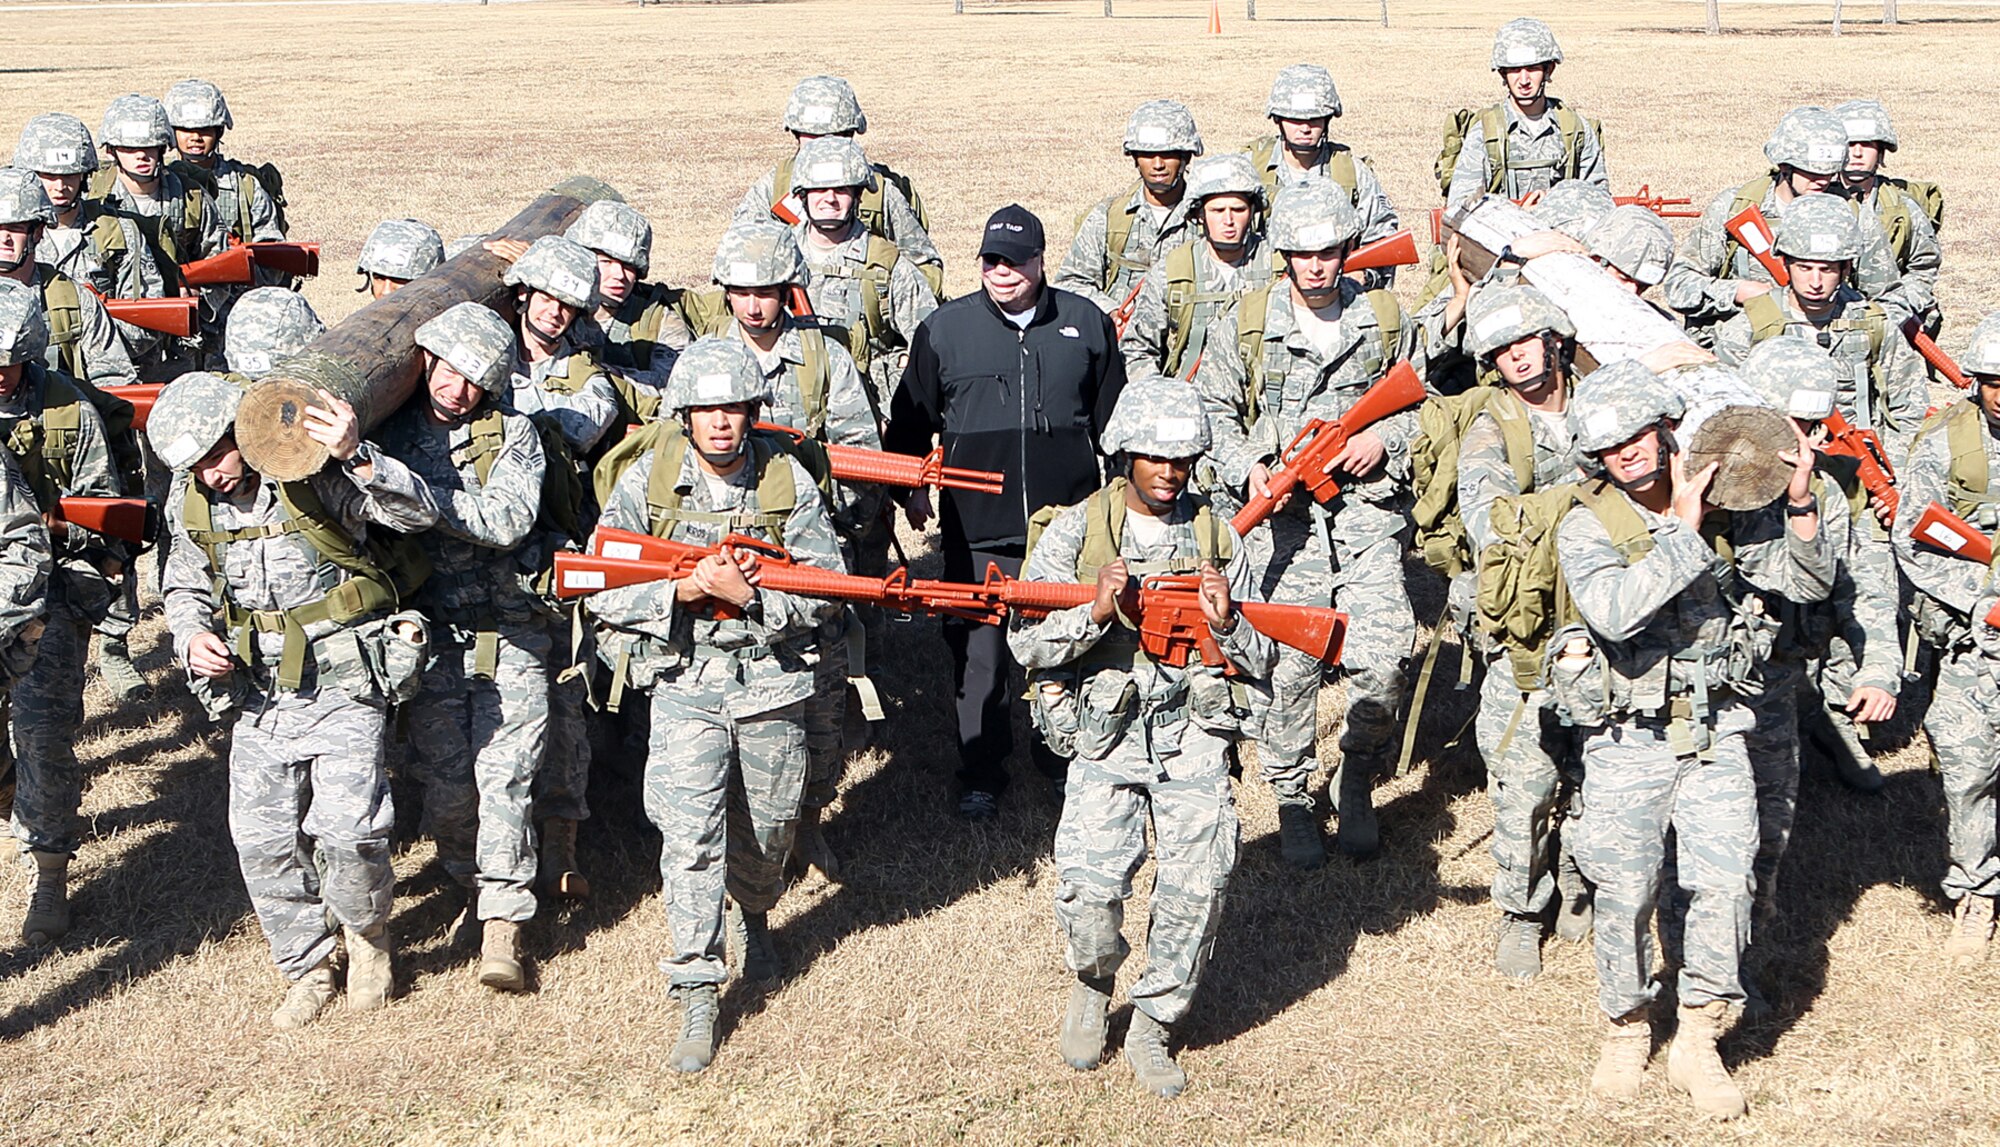 Tech. Sgt. Israel Del Toro (center) leads a class of Tactical Air Control Party students in teamwork exercises Dec. 16 at the Lackland Training Annex. (U.S. Air Force photo/Antonio Morano)